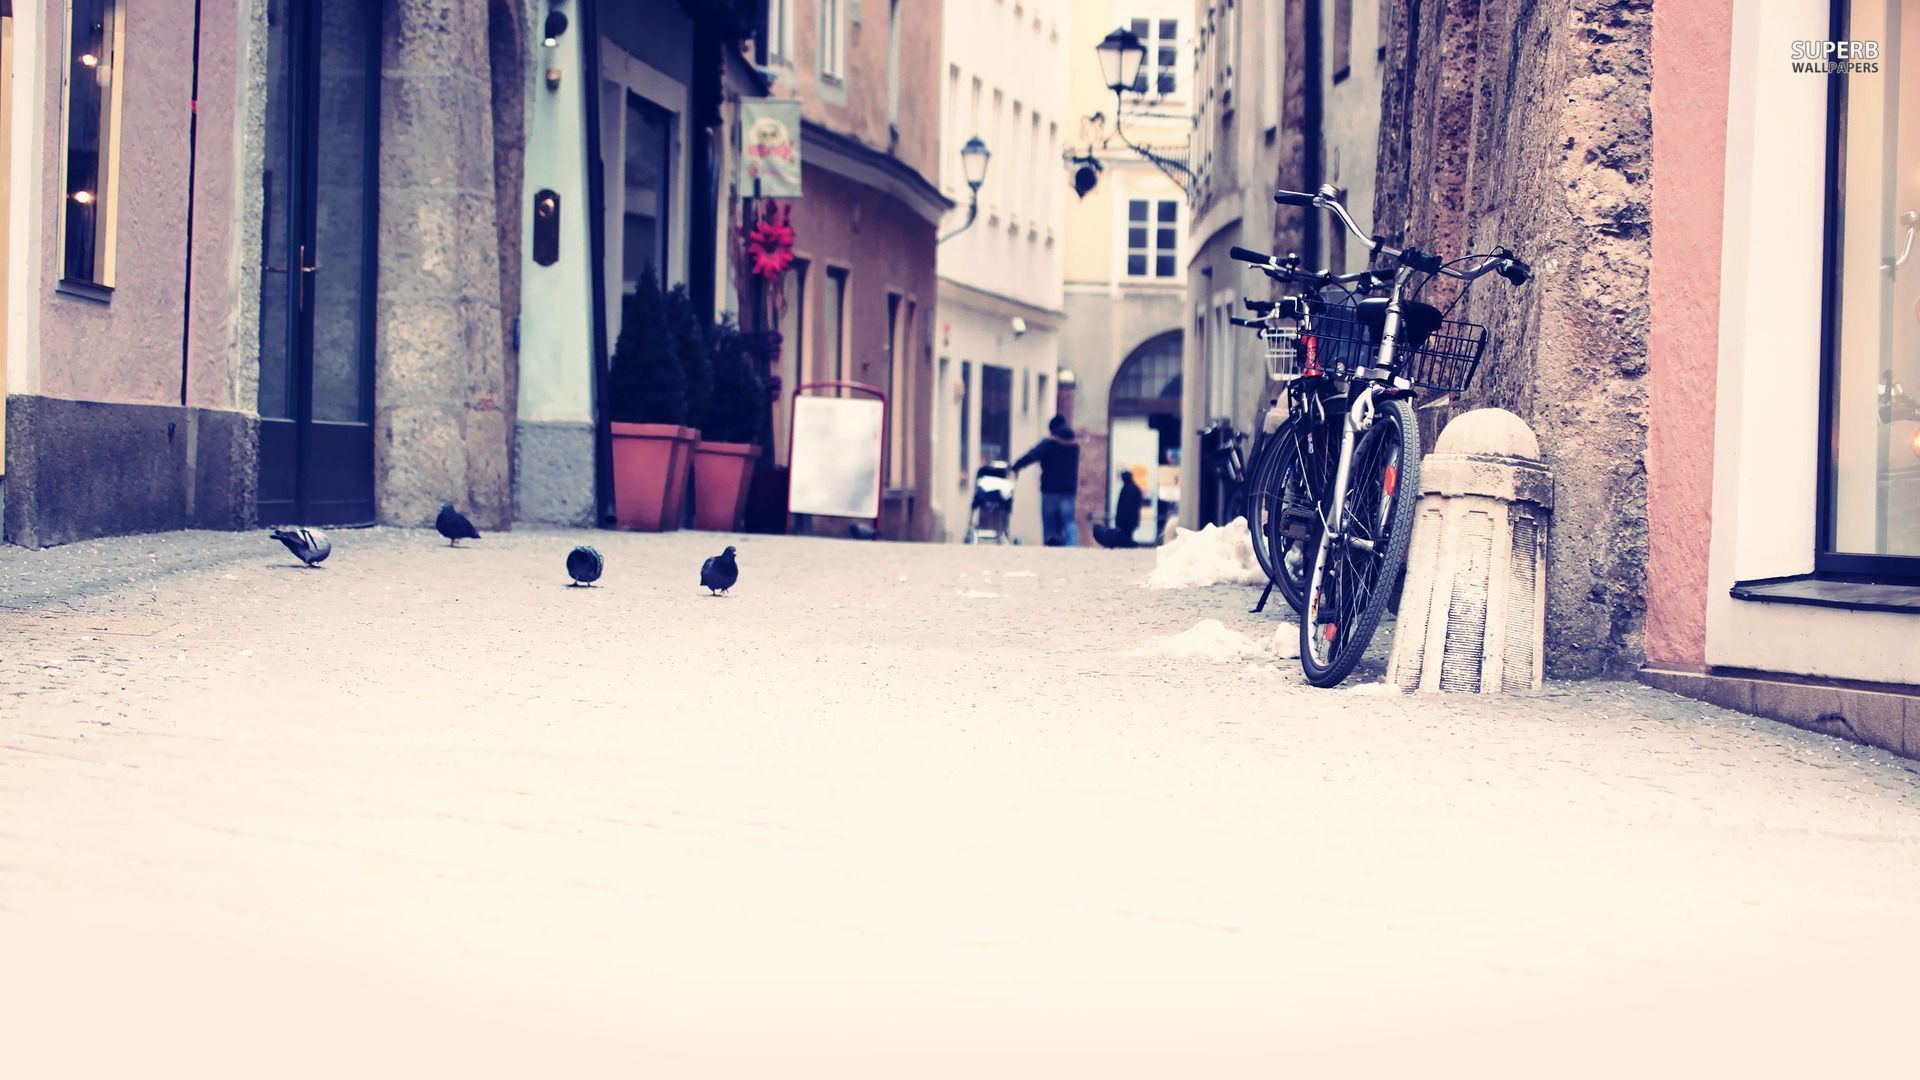 Bikes on the narrow city street wallpaper - Photography wallpapers ...